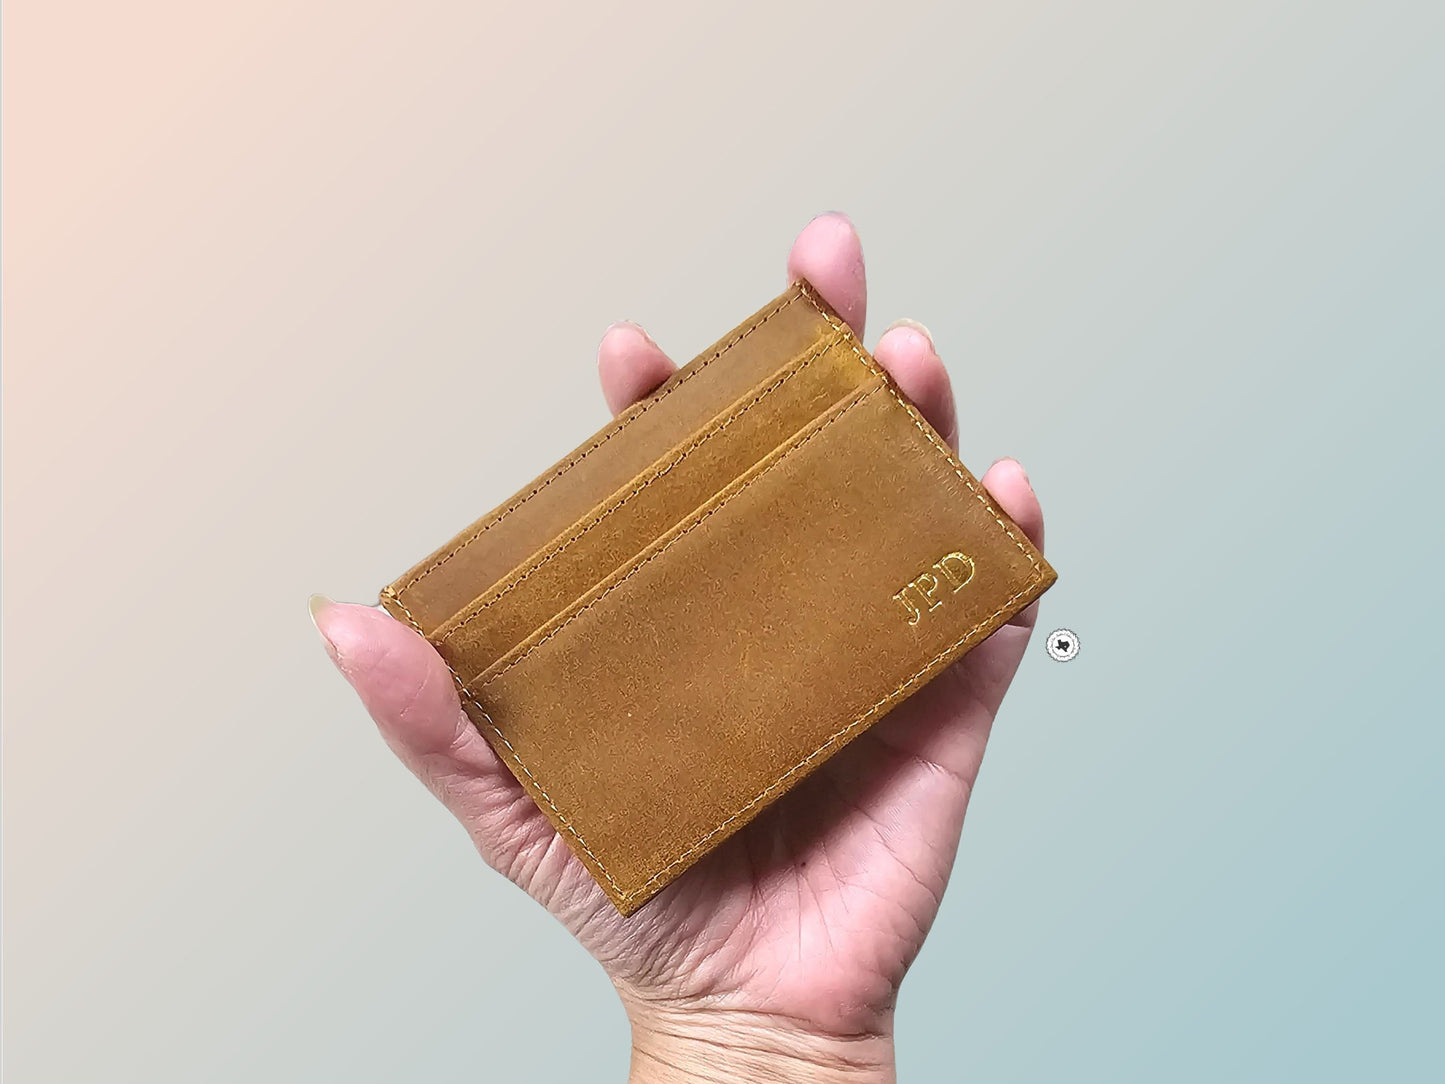 Initial Credit Card Holder, Black Blue Brown Green Red, Genuine Leather Matte Finish Minimalist Card Wallet